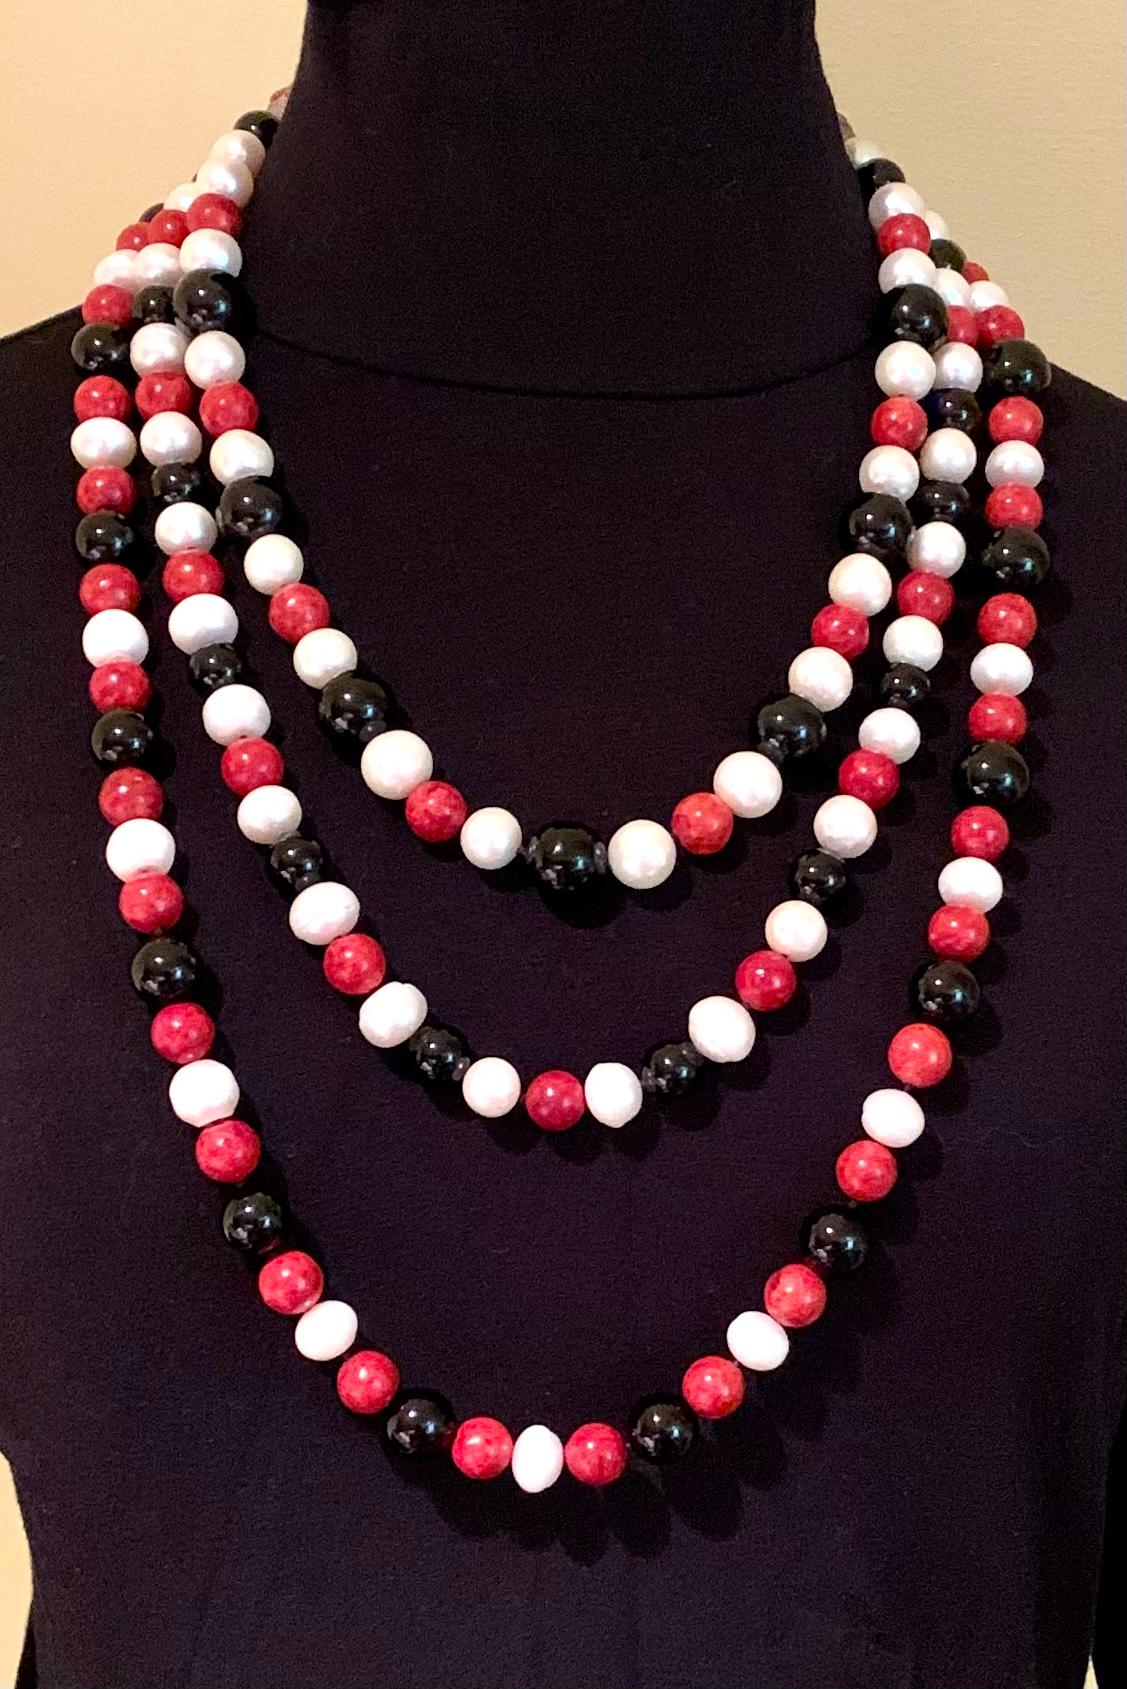 Modern Estate A. Jeschel Pearl, Coral, Onyx, Sponge Coral Sterling Silver Necklace For Sale